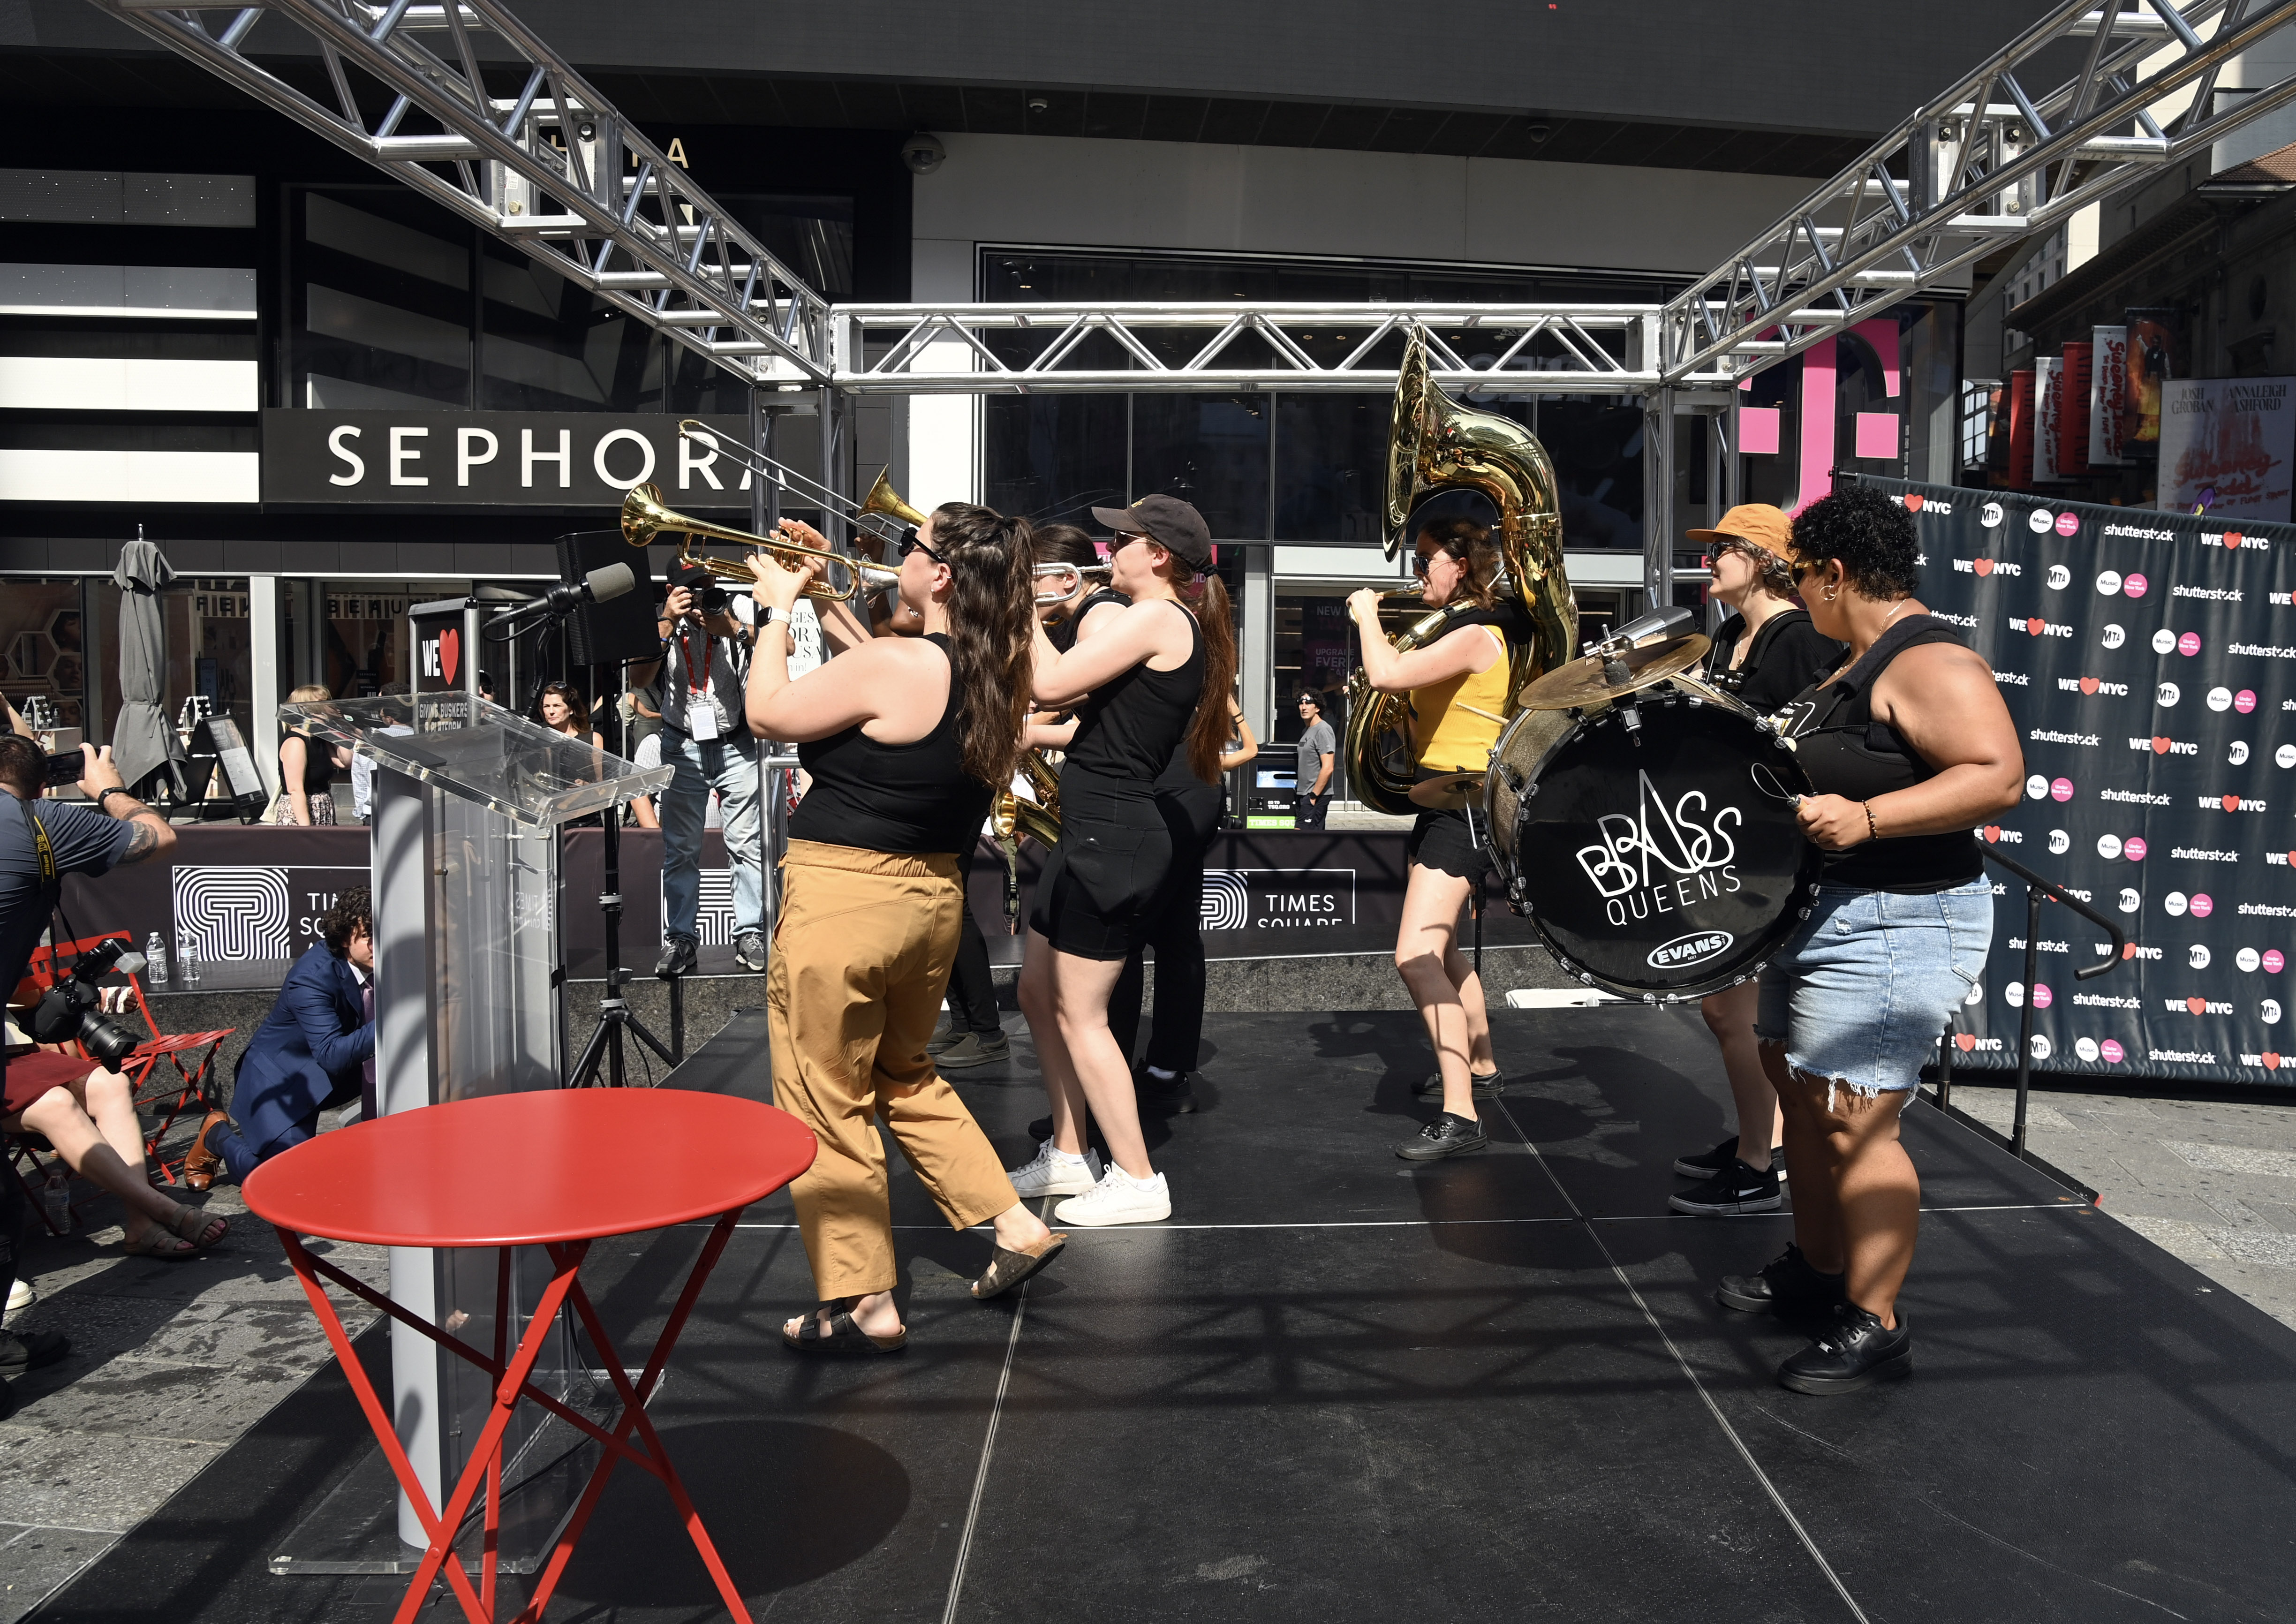 all female band called the Brass Queens perform on stage at Times Square 